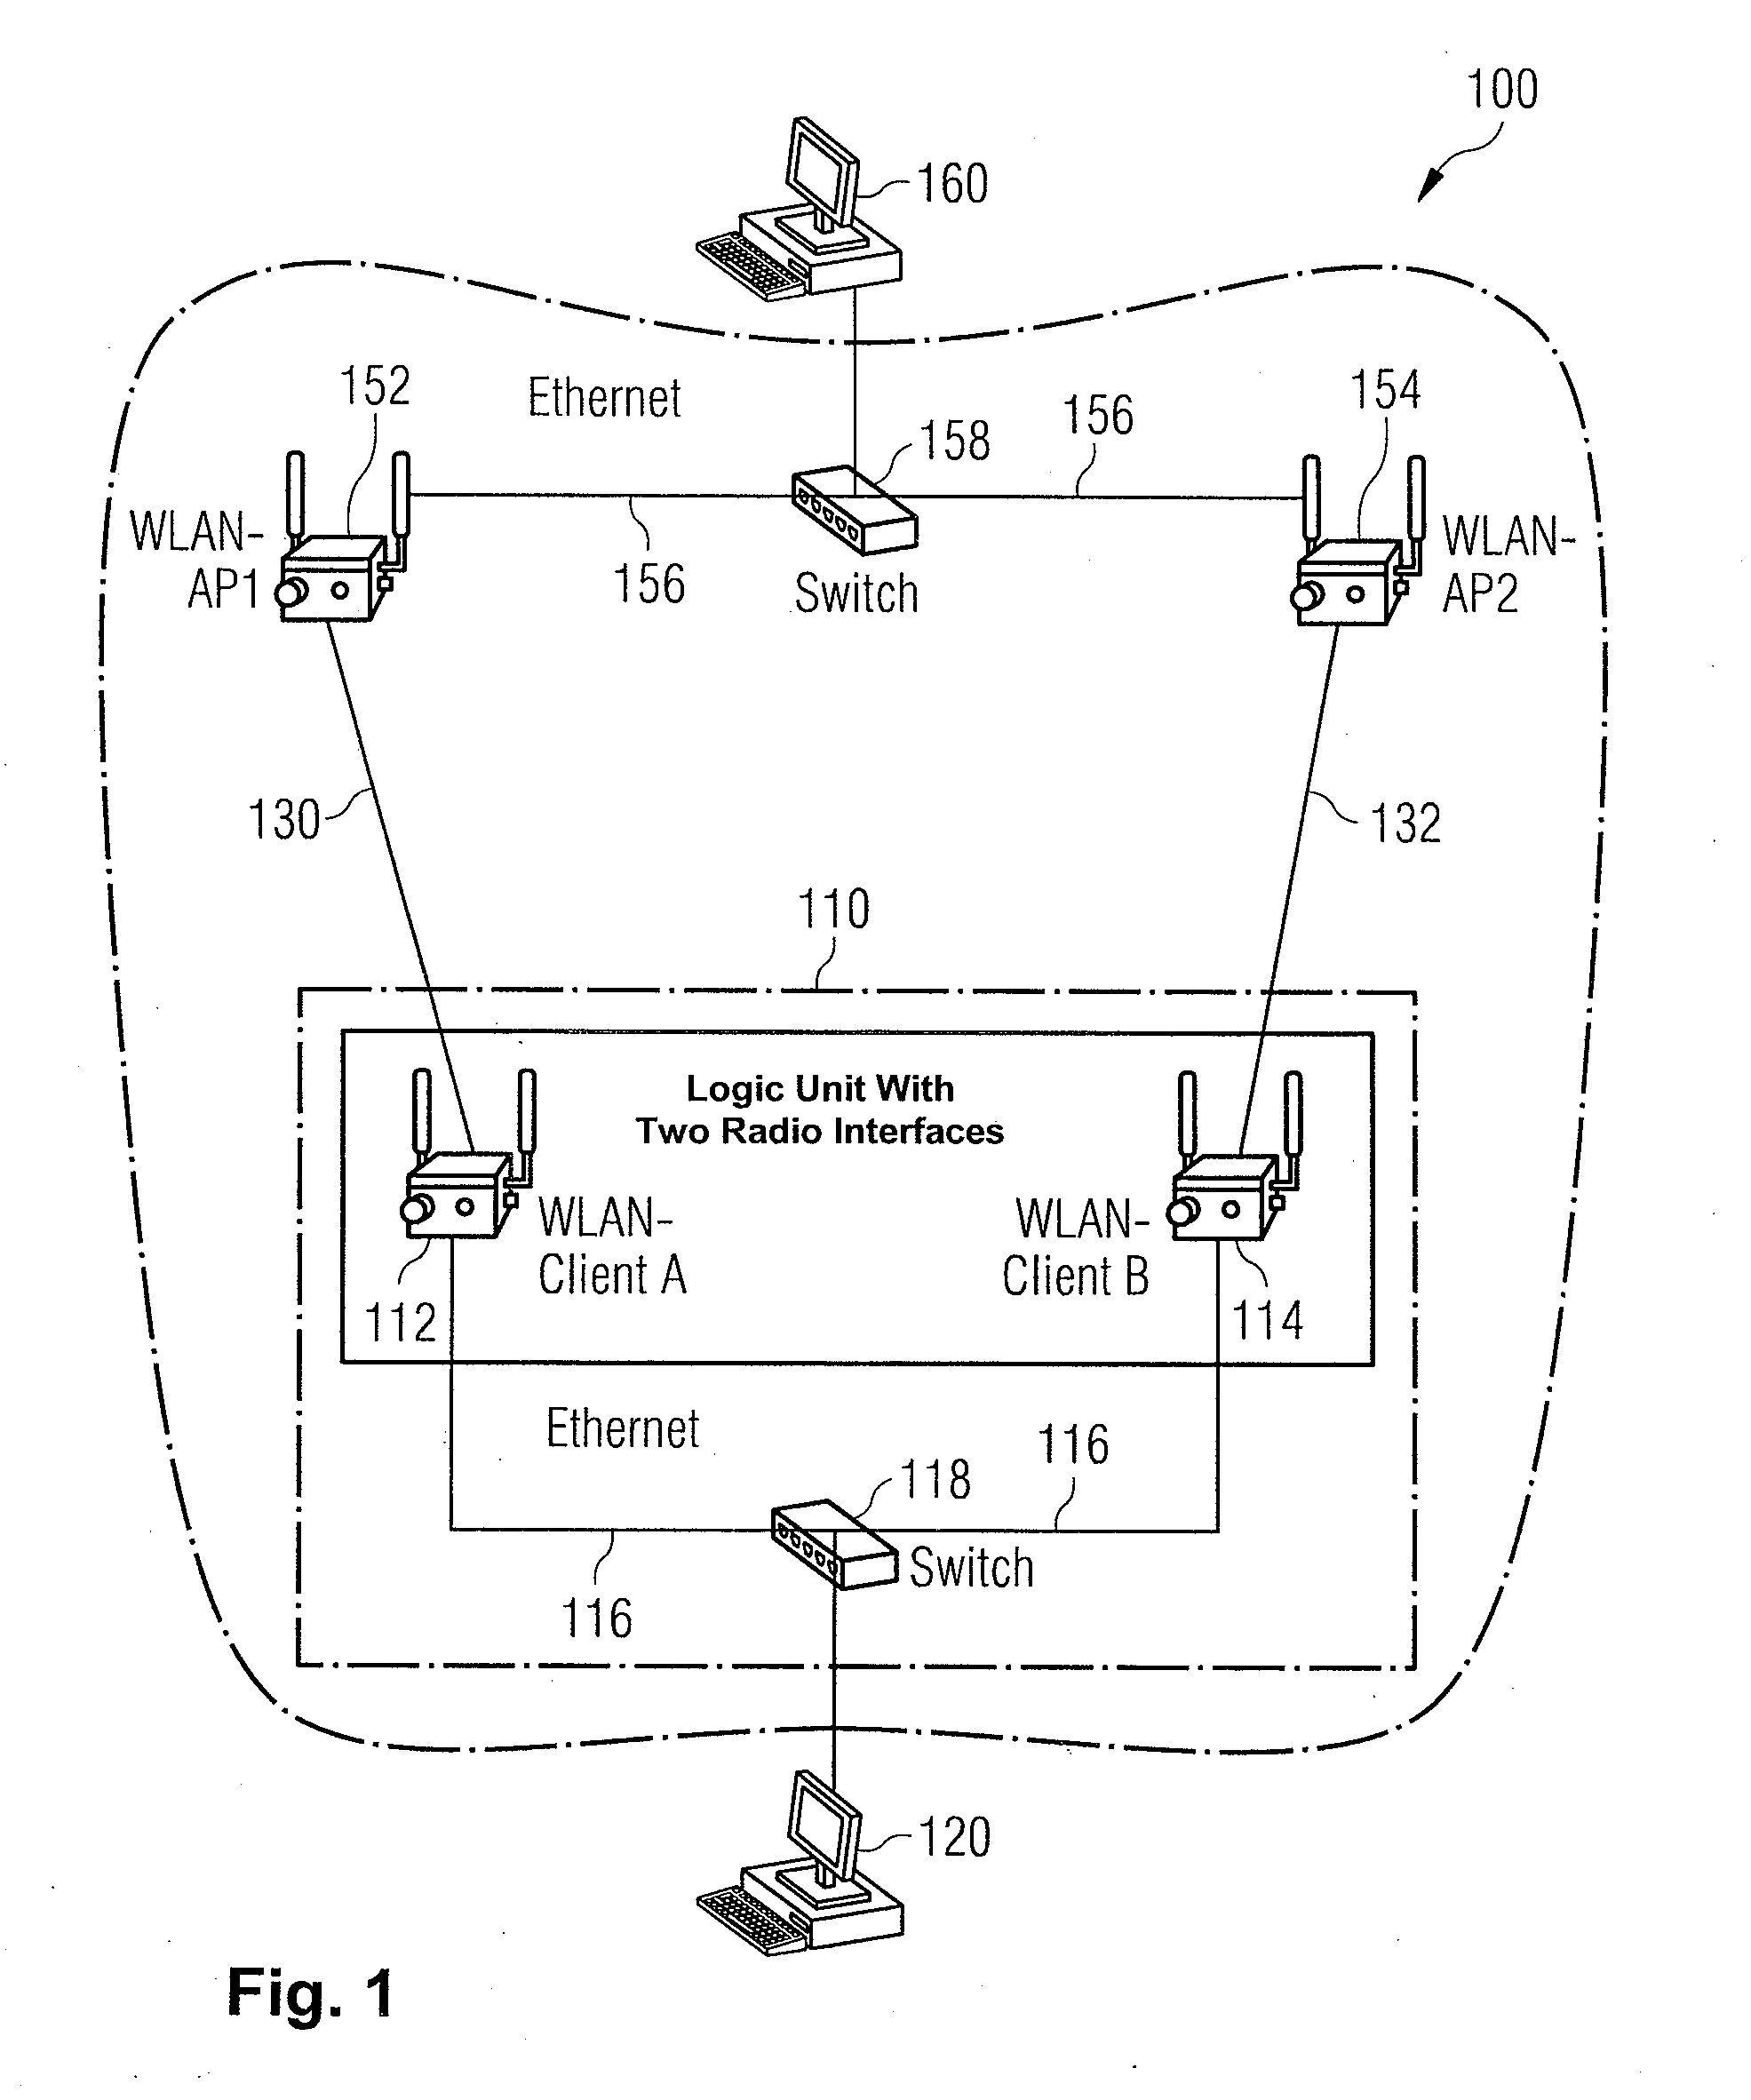 Radio Station System for a Wireless Network